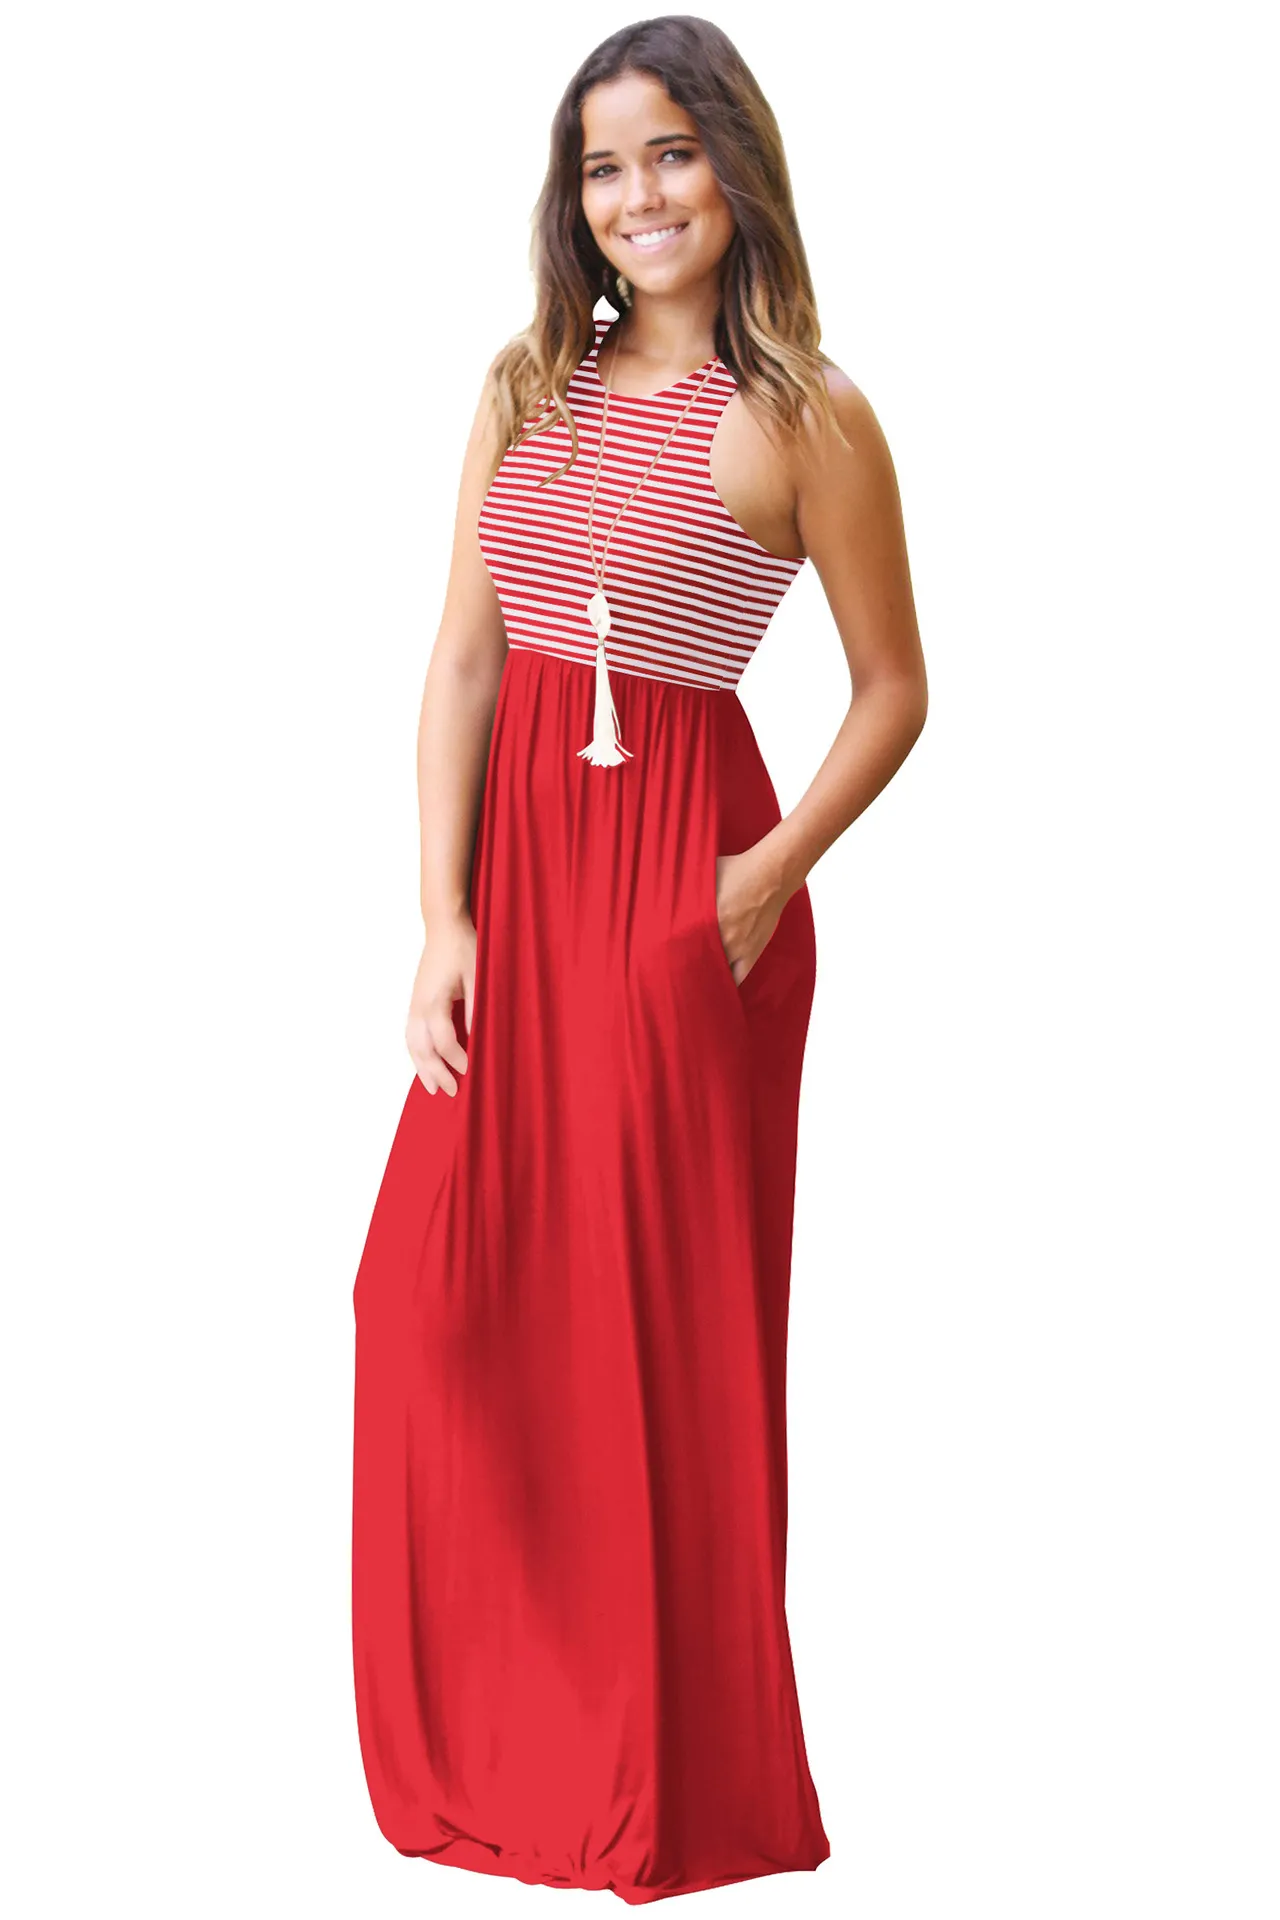 Sexy Womens Striped Maxi Dresses Sweet Female Summer Solid Color Panelled Scoop Neck Sleeveless Dresses Free Shipping